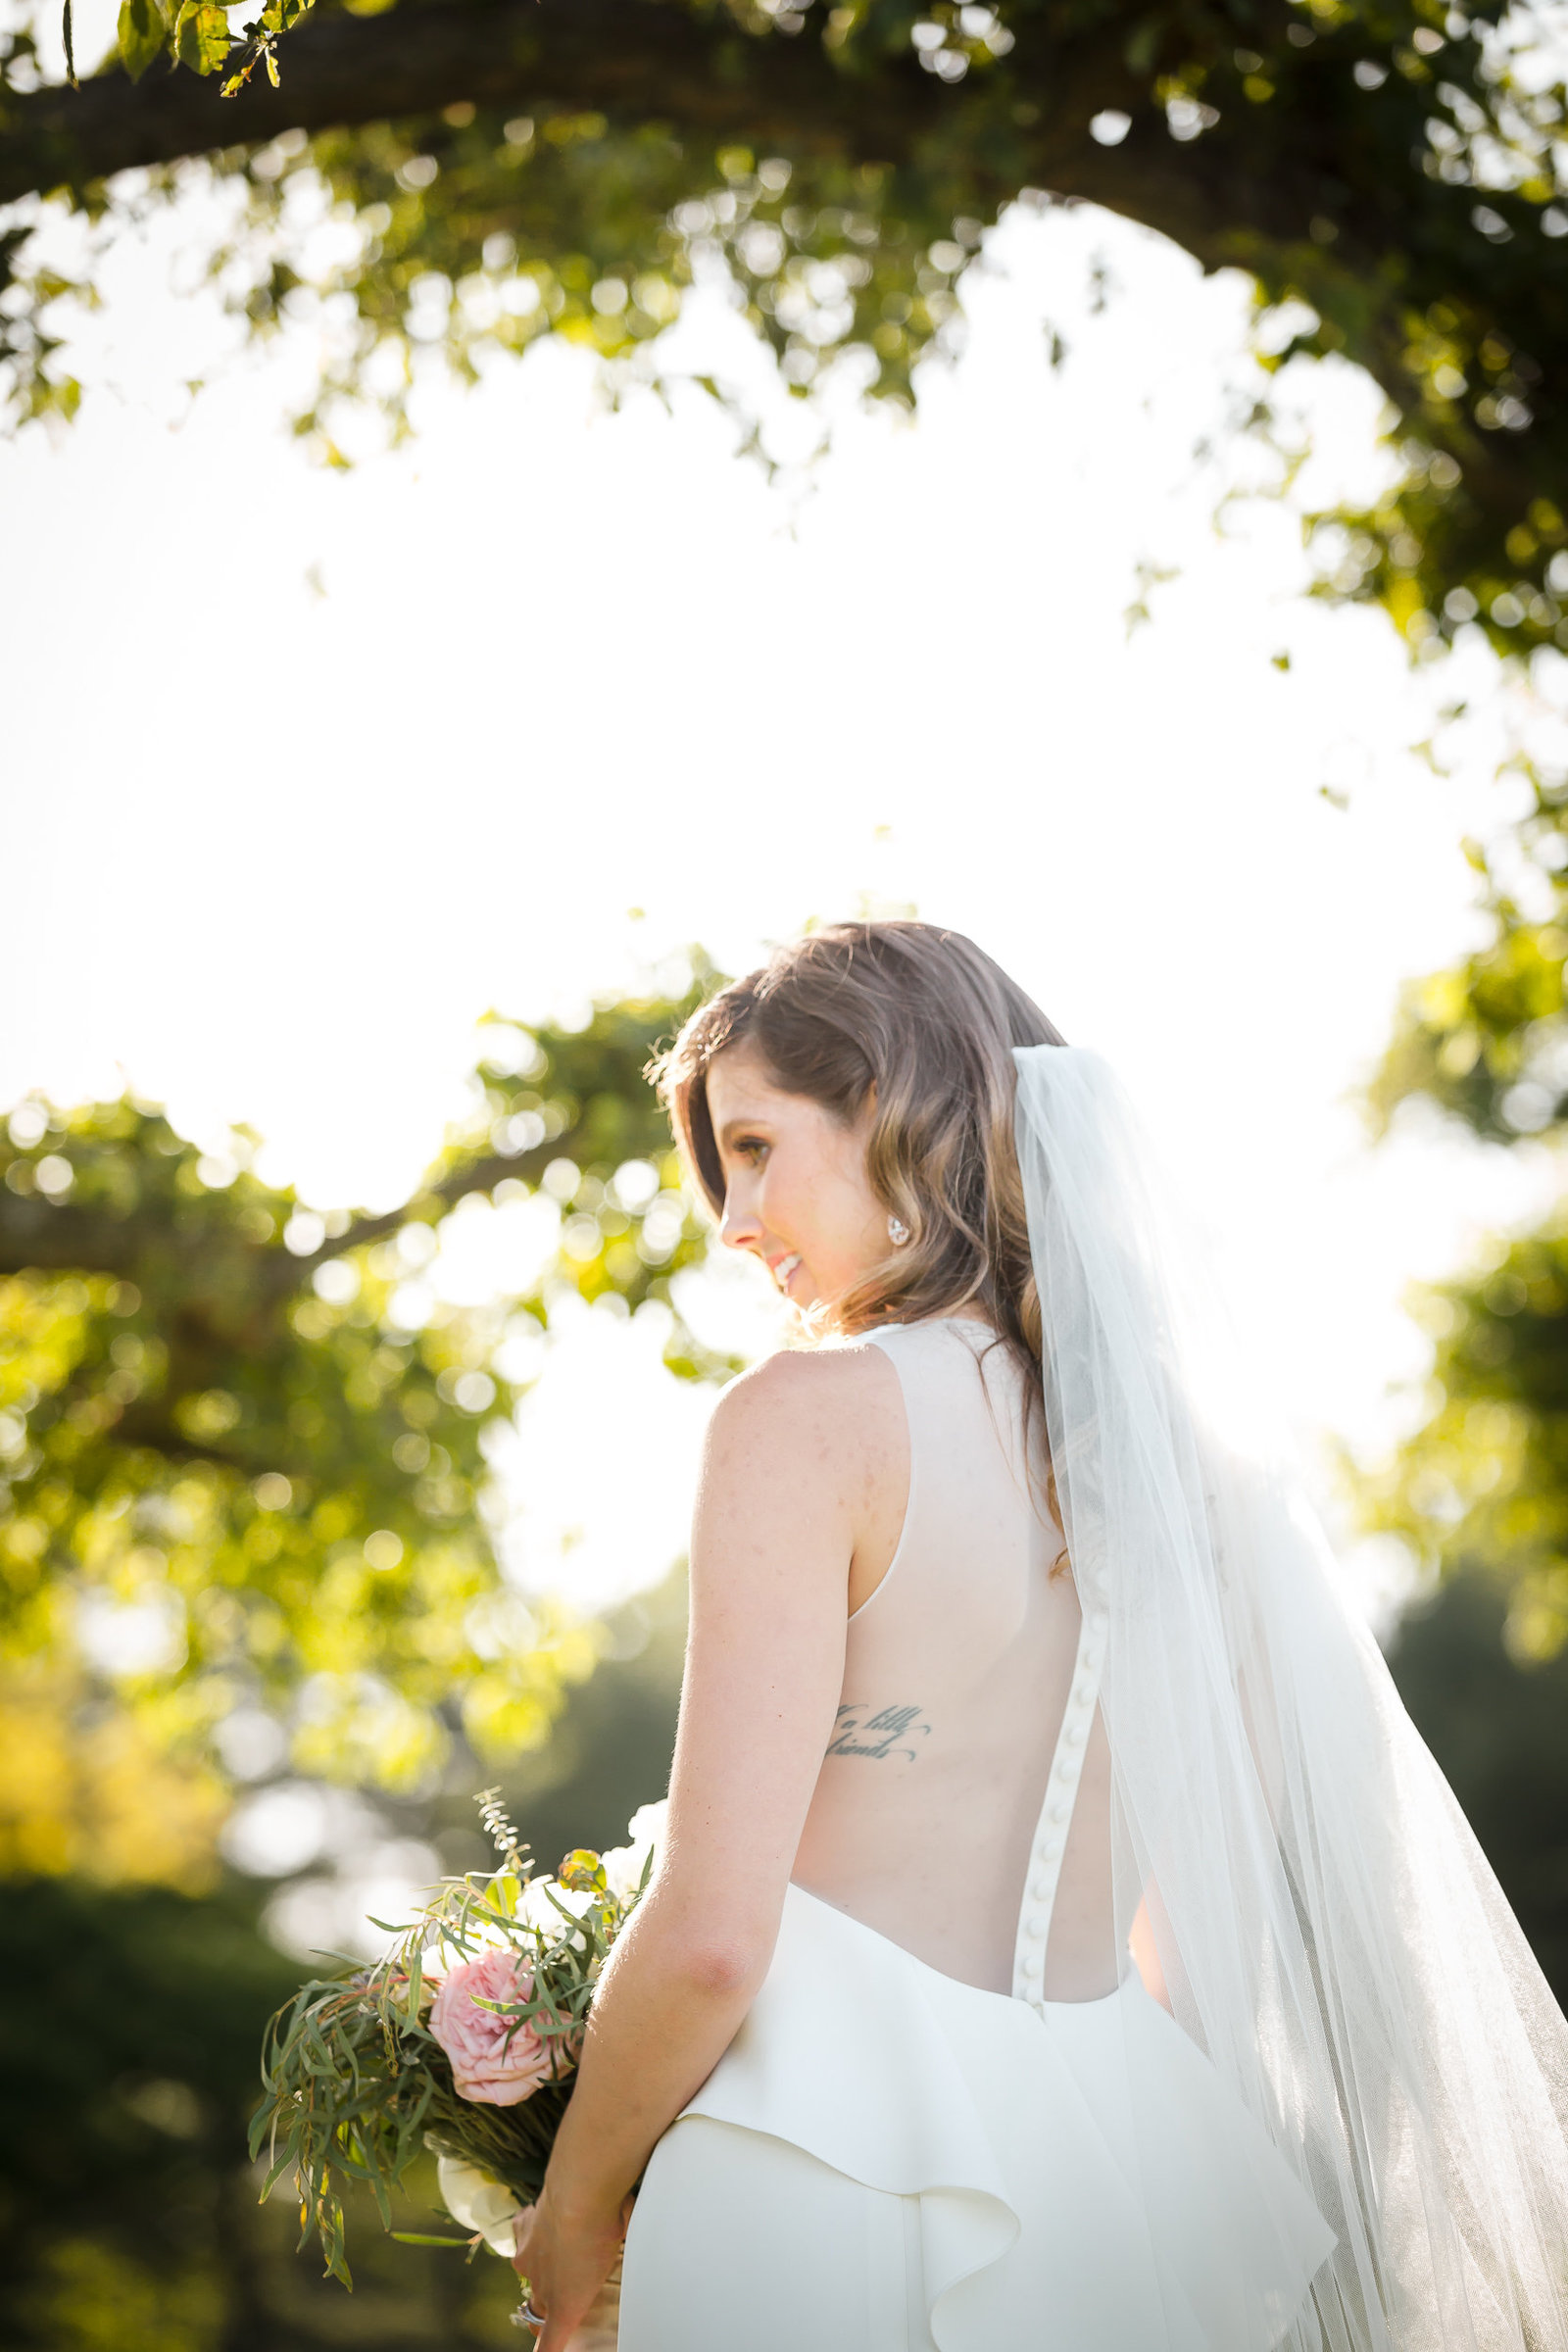 Bridal portrait by Jamerlyn Brown Photography in Massachusetts